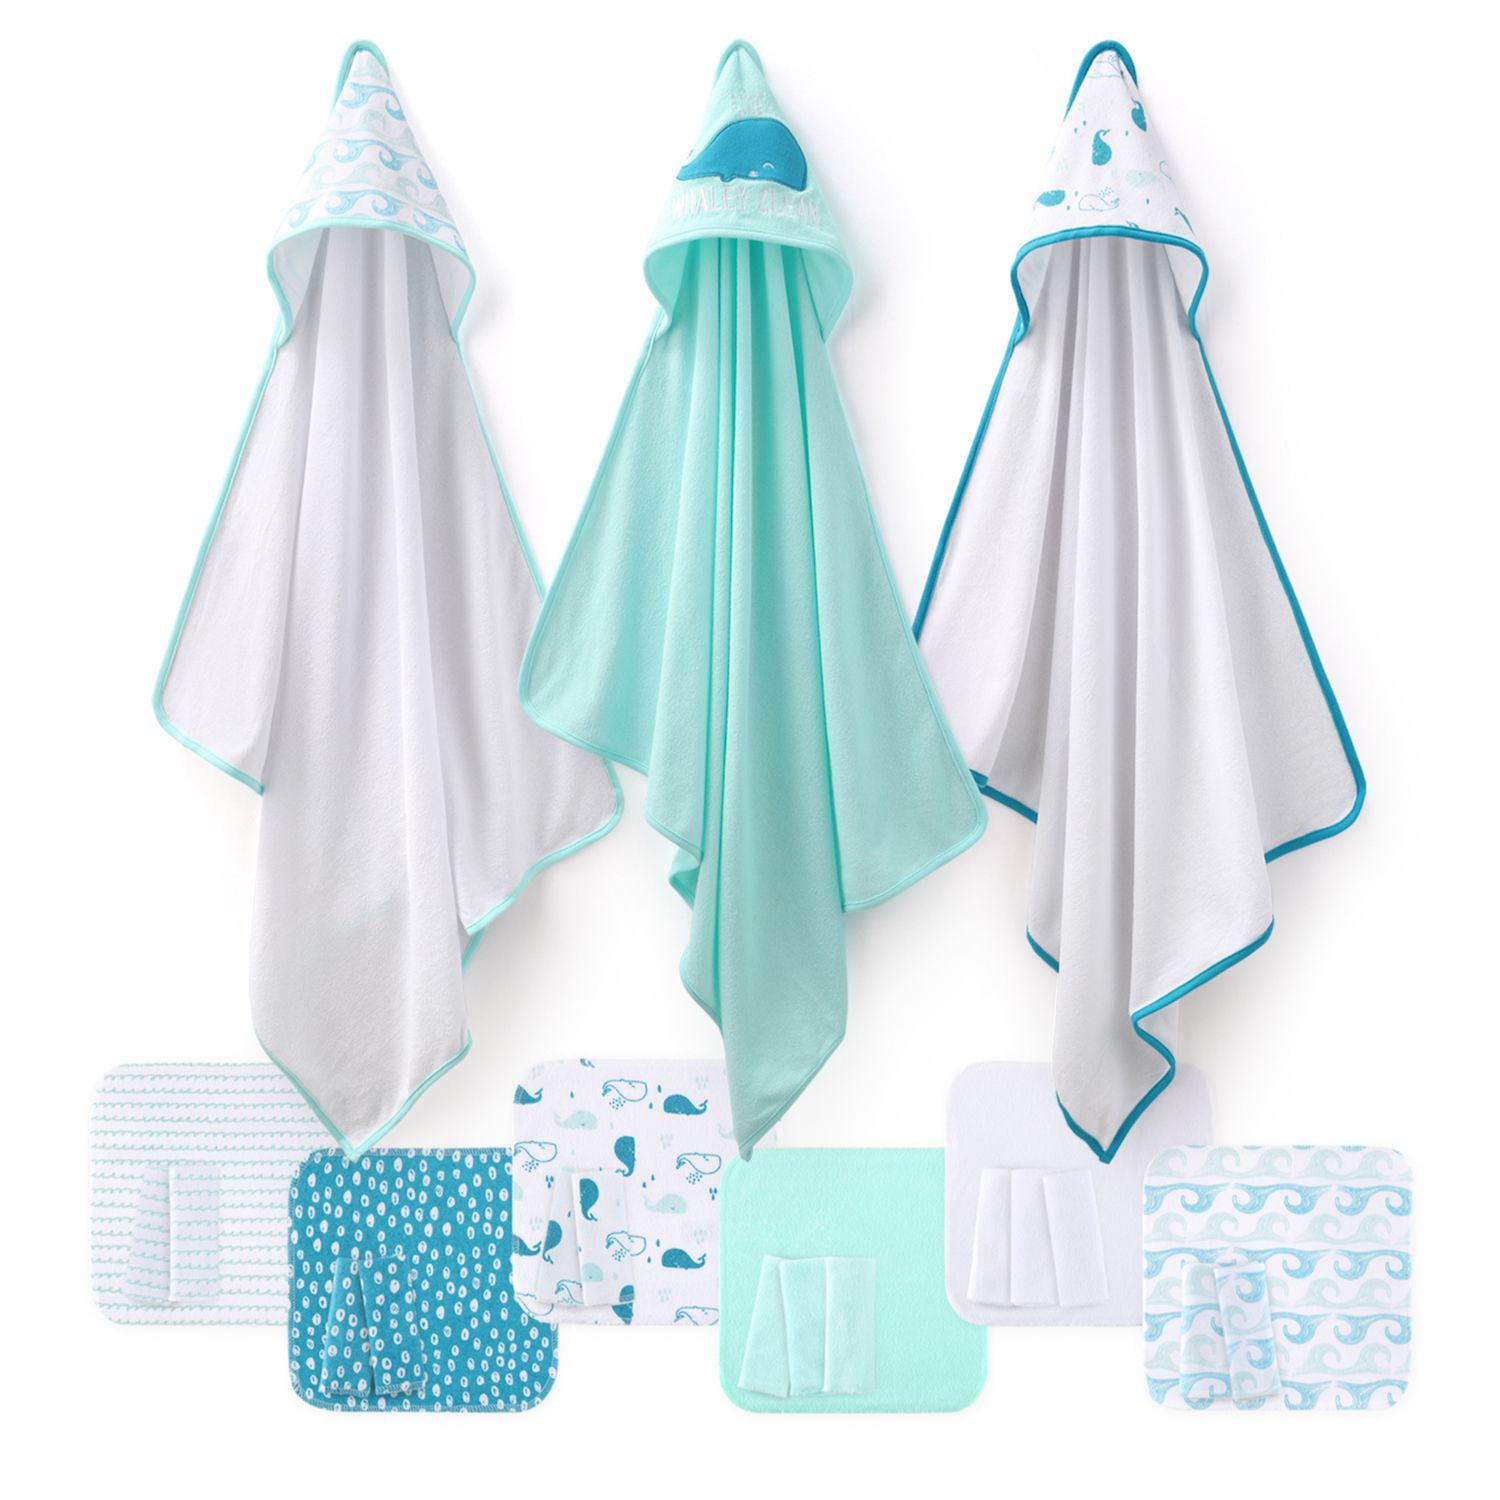 A Special Delivery New Baby Gift Basket - Blue - baby bath set